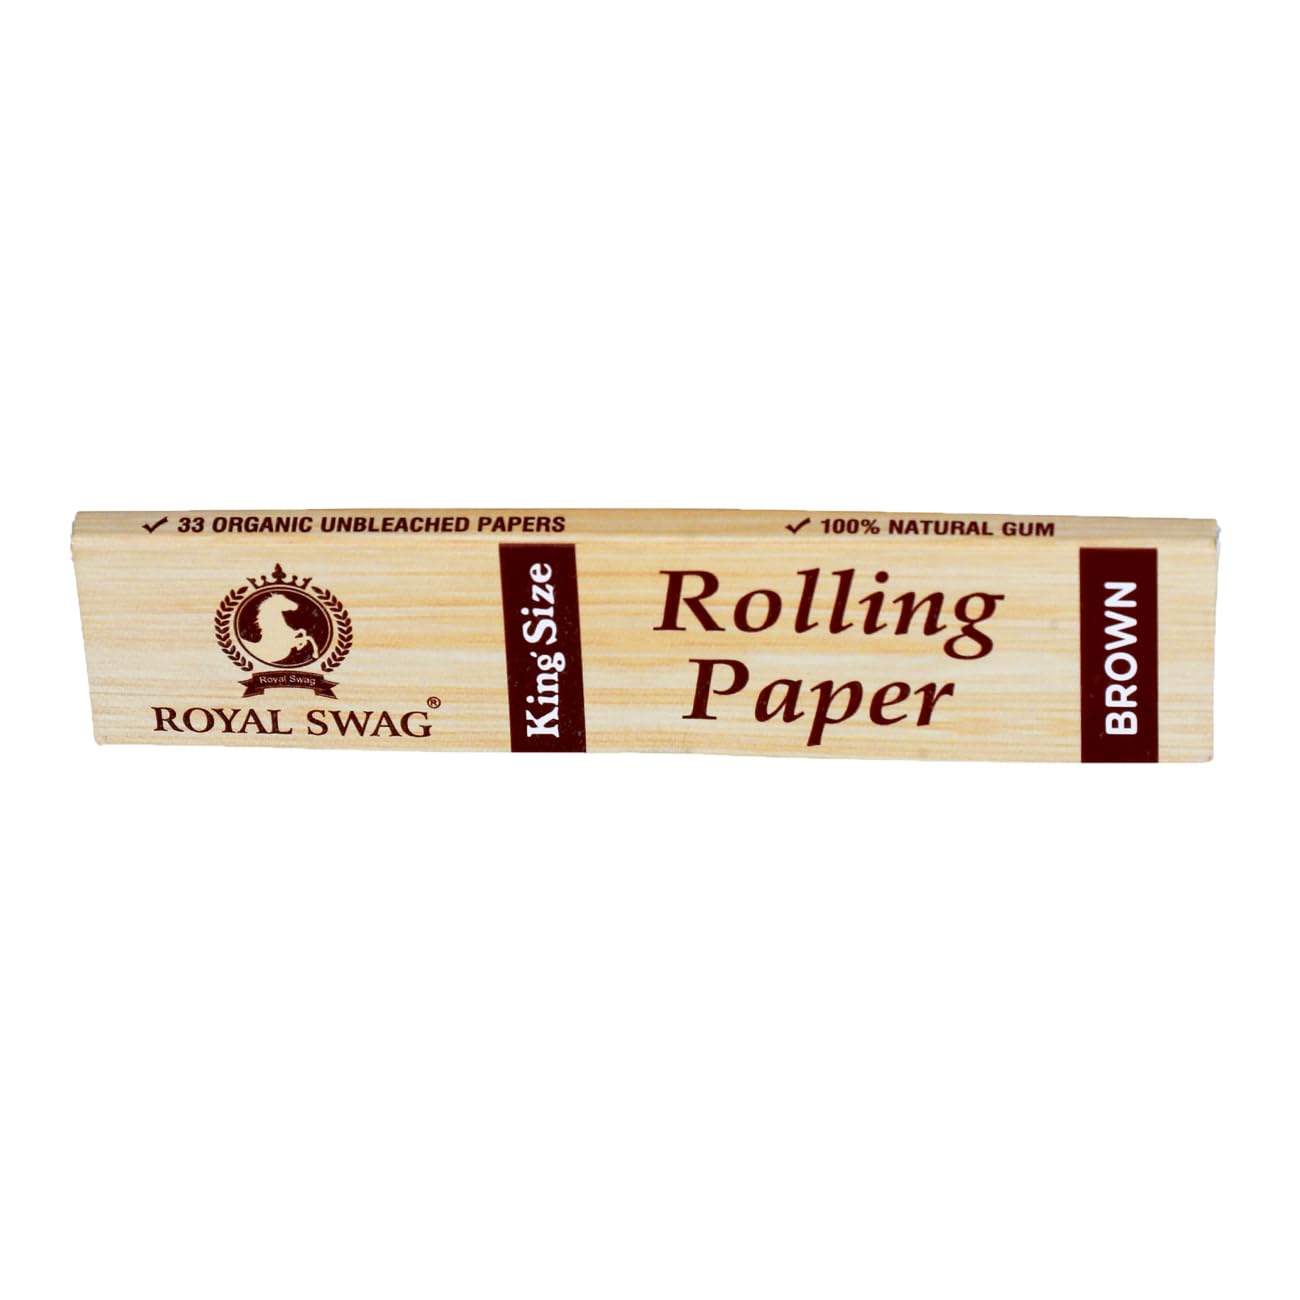 King Size Smoking Rolling Papers | Premium Brown Unbleached Paper | Pack Of 5 Each Pack has 33 Leaf| 165 Rolling Papers